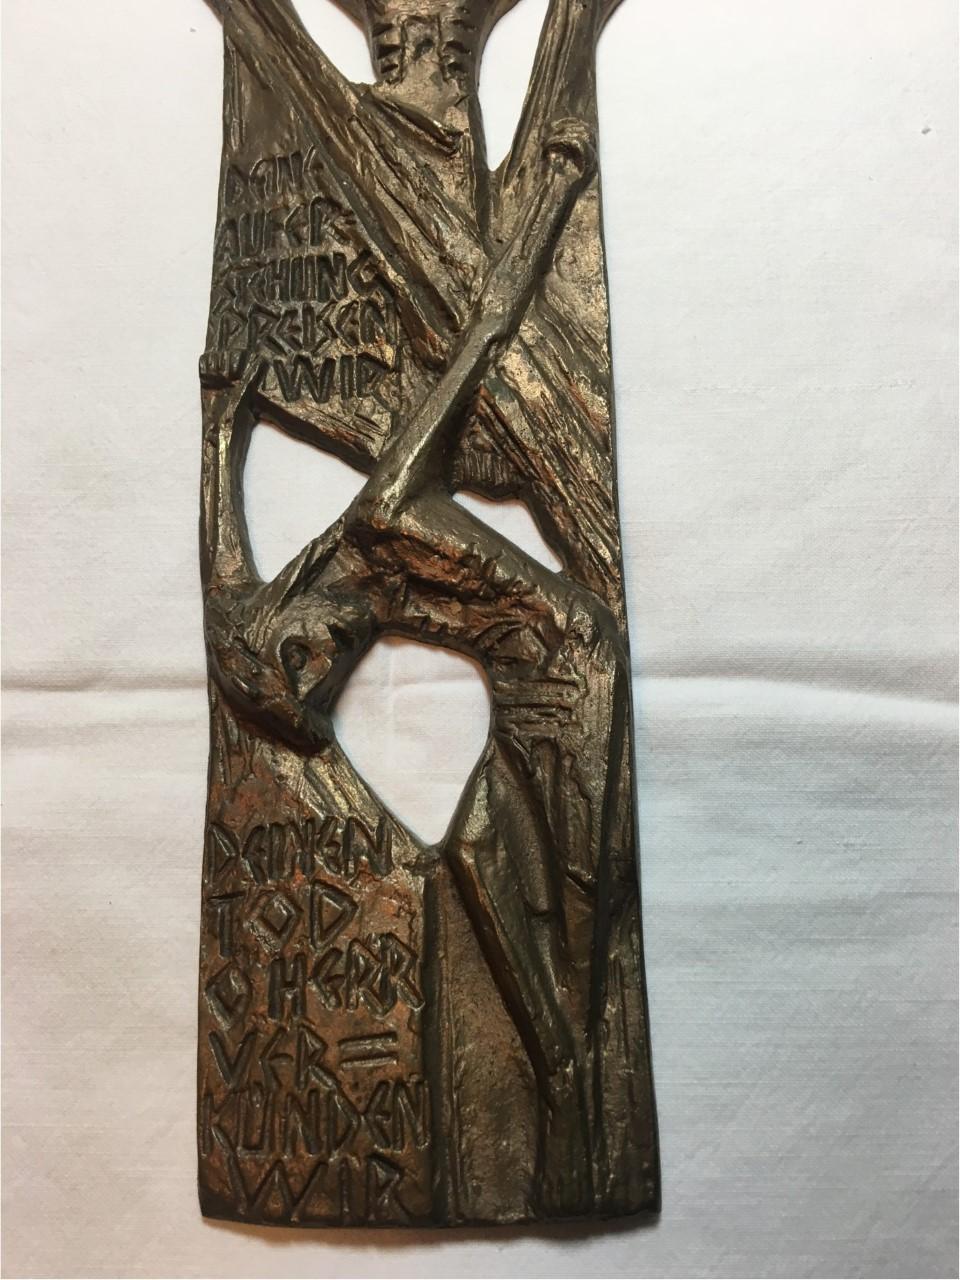 Large Brass Creed in German Inscribed Wall Cross Relief In Good Condition For Sale In Frisco, TX